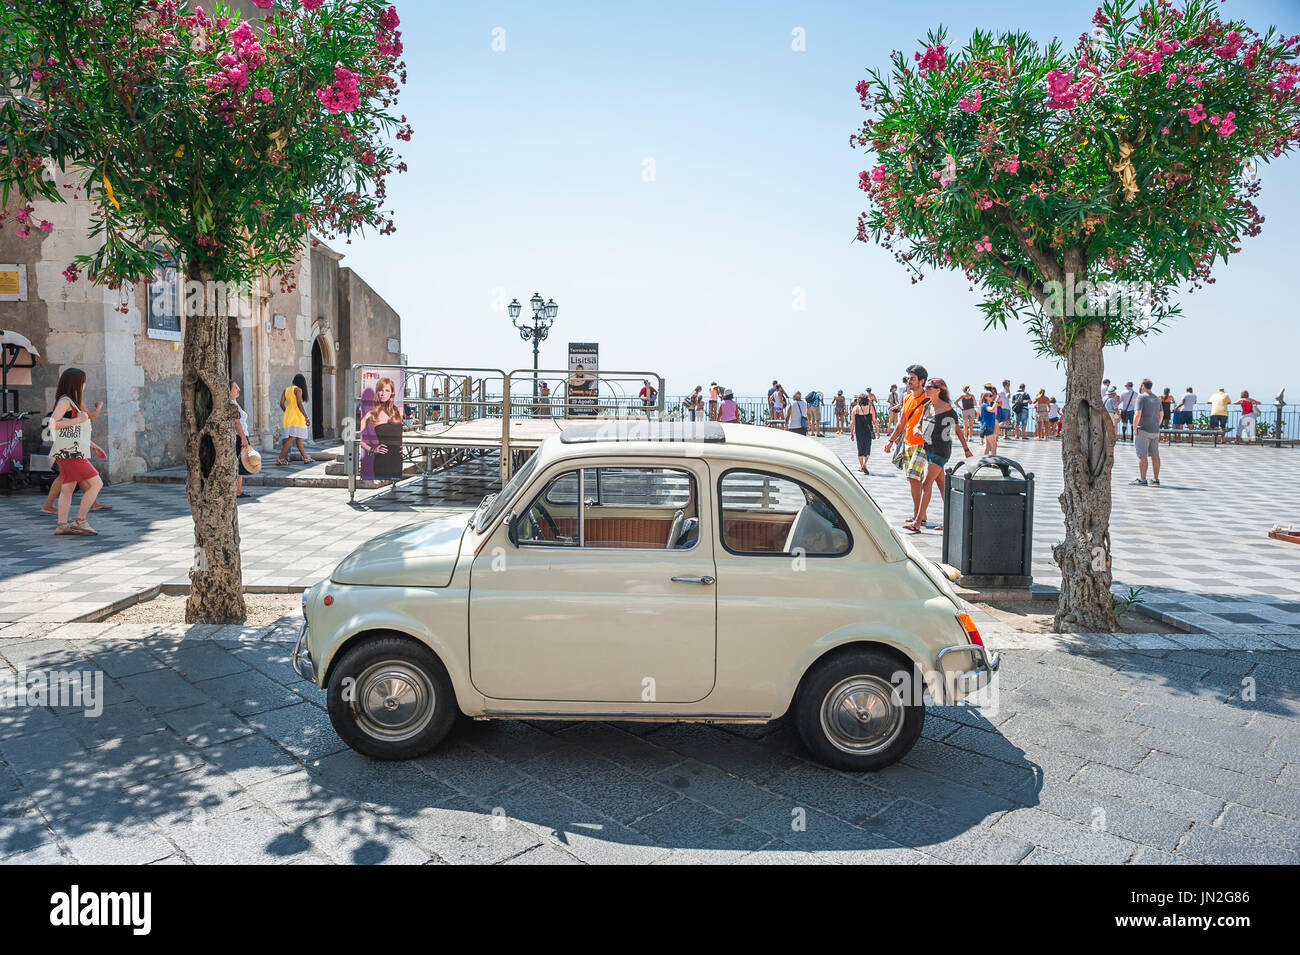 Fiat 500 old car, view of a classic Fiat 500 Cinquecento parked in Piazza IX Aprile in the historic resort town of Taormina, Sicily. Stock Photo